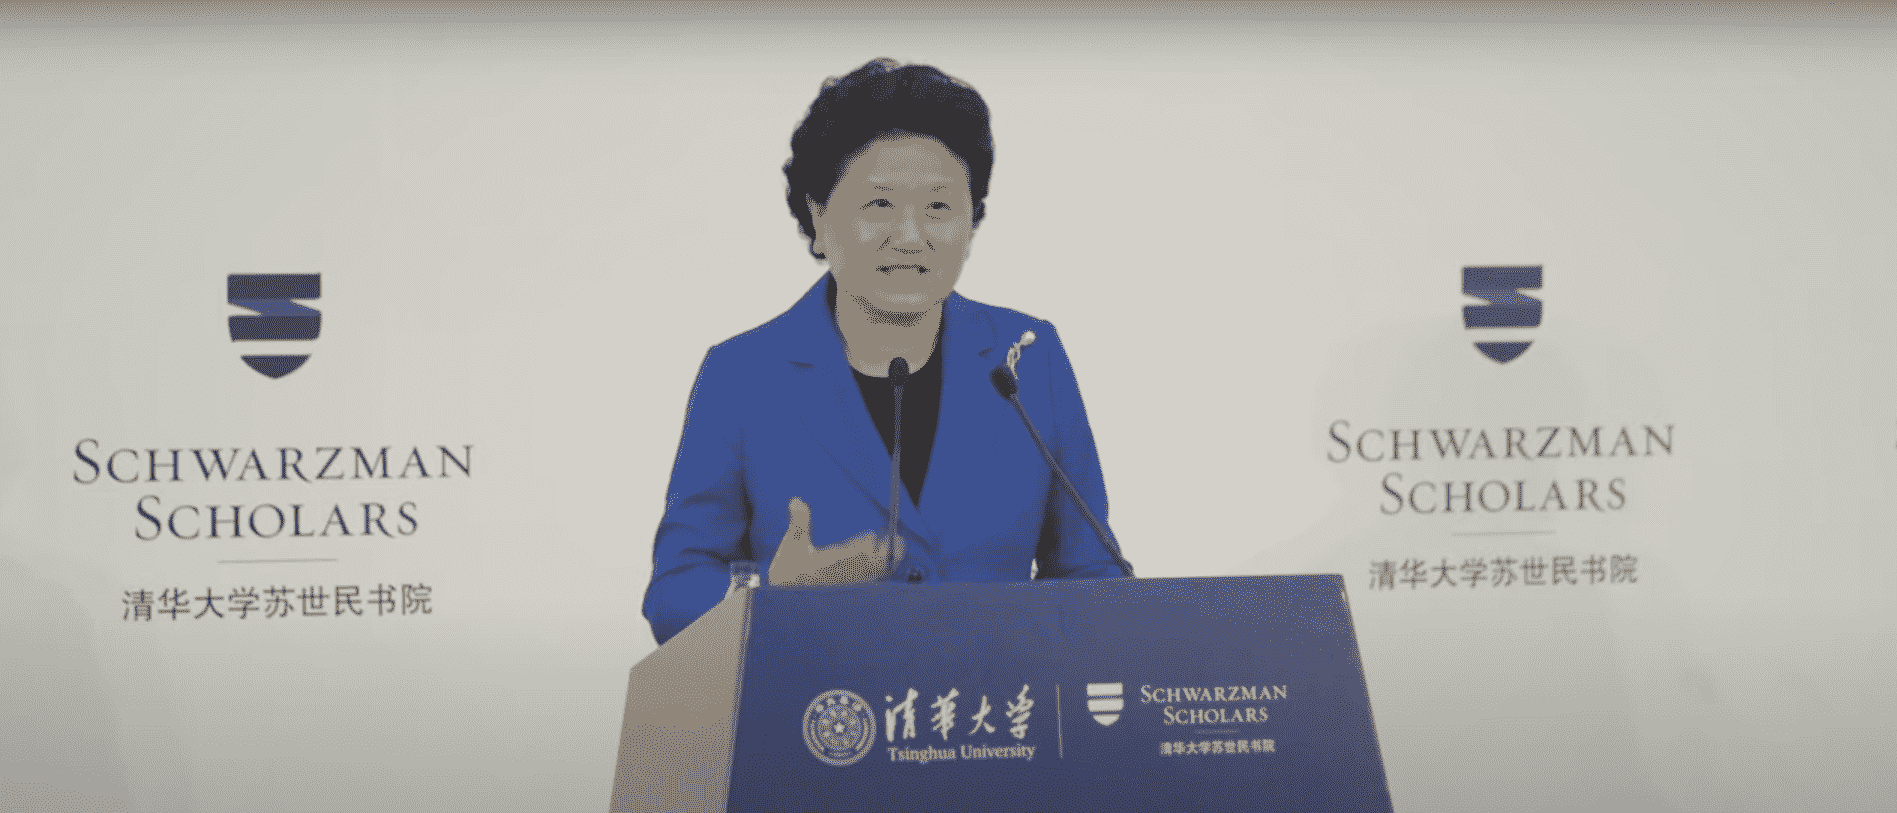 The vice premier of the PRC and head of the United Front Work Department, Liu Yandong, gave a speech at the annual opening ceremony for Schwarzman Scholars at Tsinghua University in 2016. [YouTube/Screenshot/SchwarzmanScholars] 